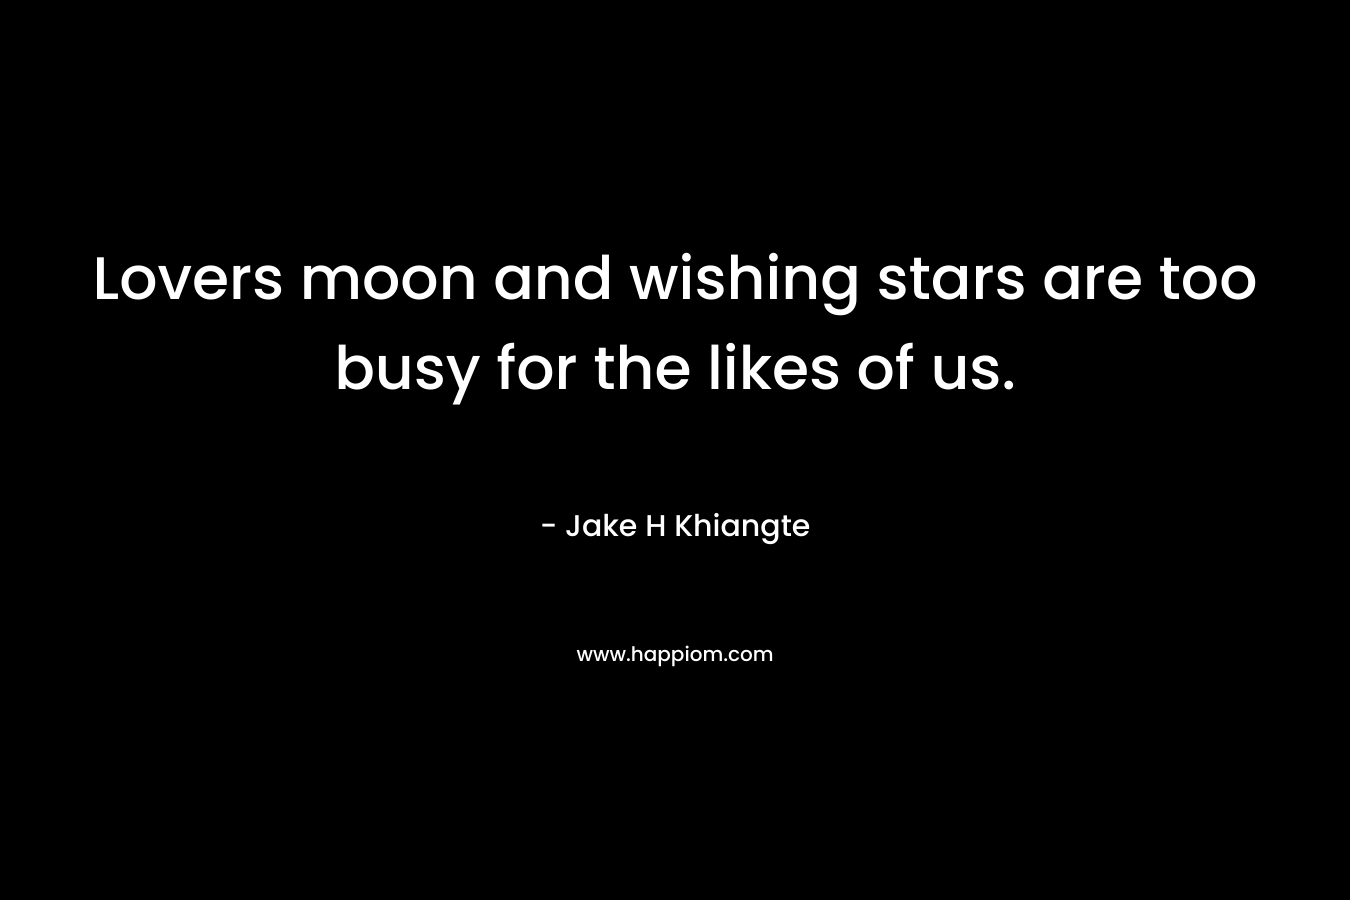 Lovers moon and wishing stars are too busy for the likes of us. – Jake H Khiangte